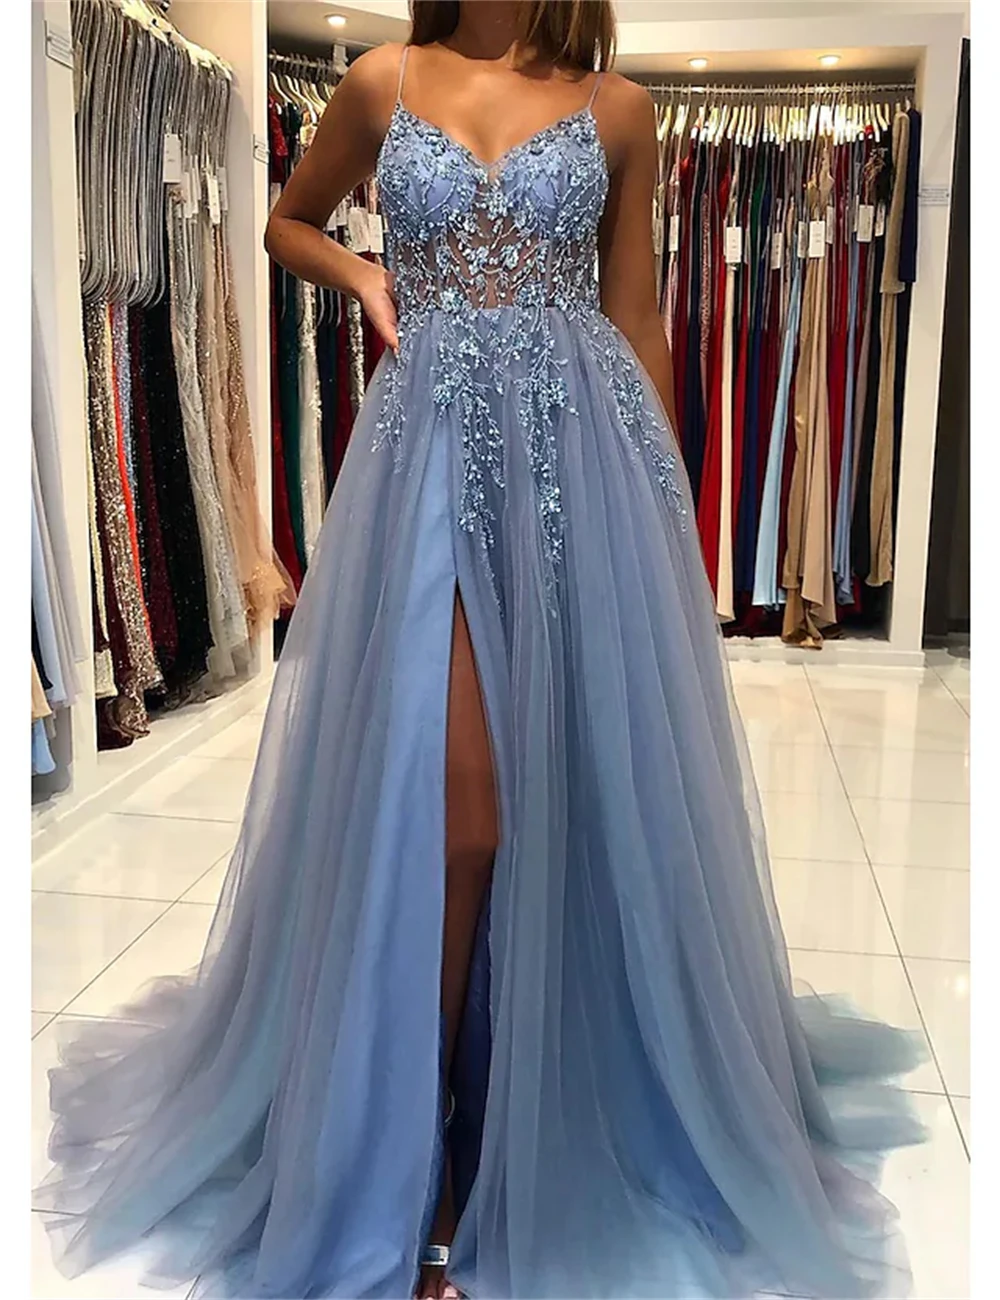 

Stunning A-Line Prom Dresses Party Wear Fancy Princess Dress Beautiful Spaghetti Strap V-Neck Court Train Tulle with Beading